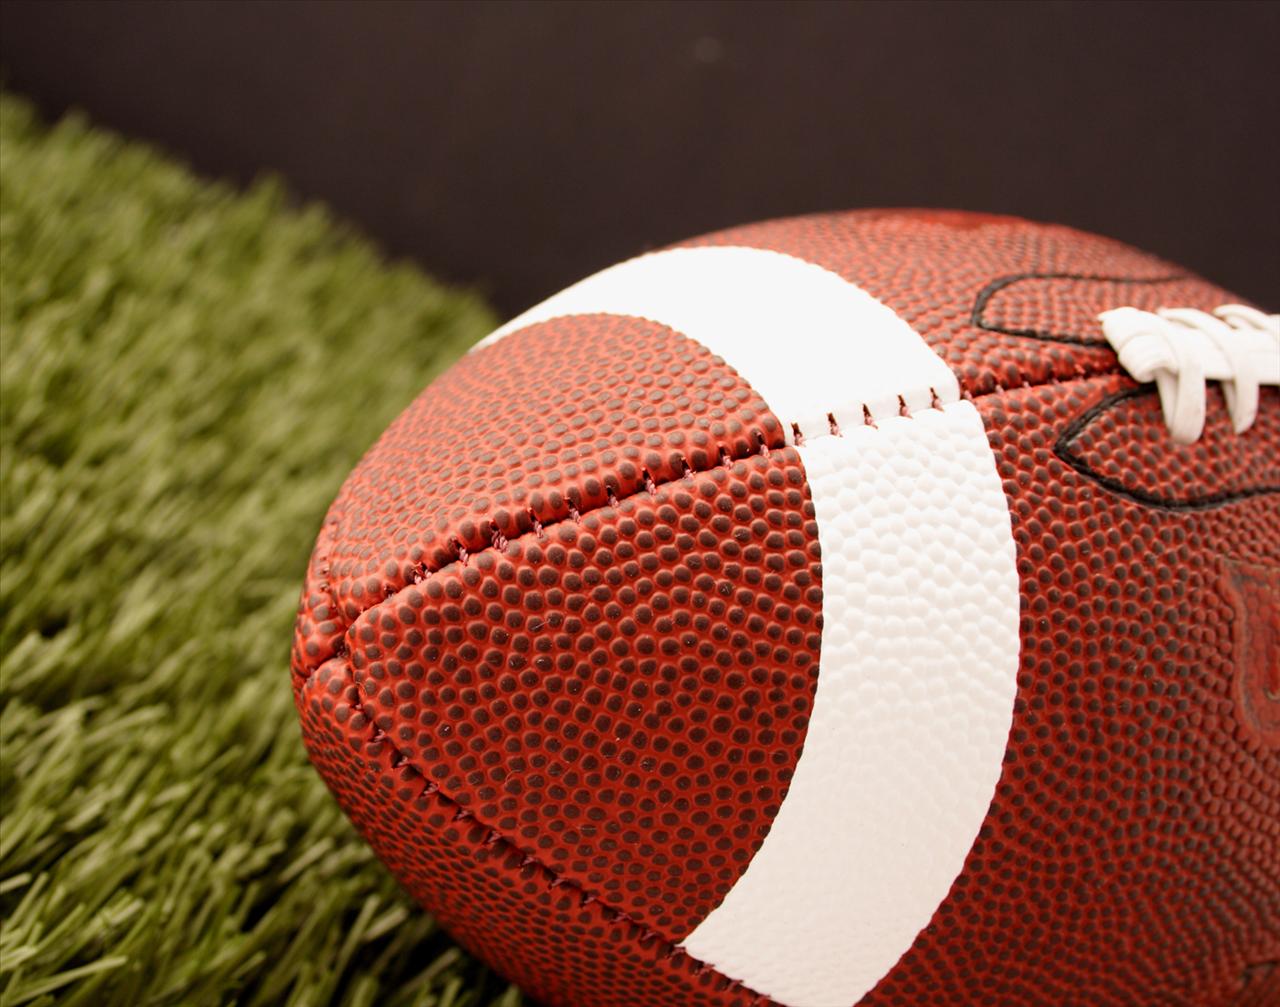 Football Up Close Backgrounds powerpoint backgrounds